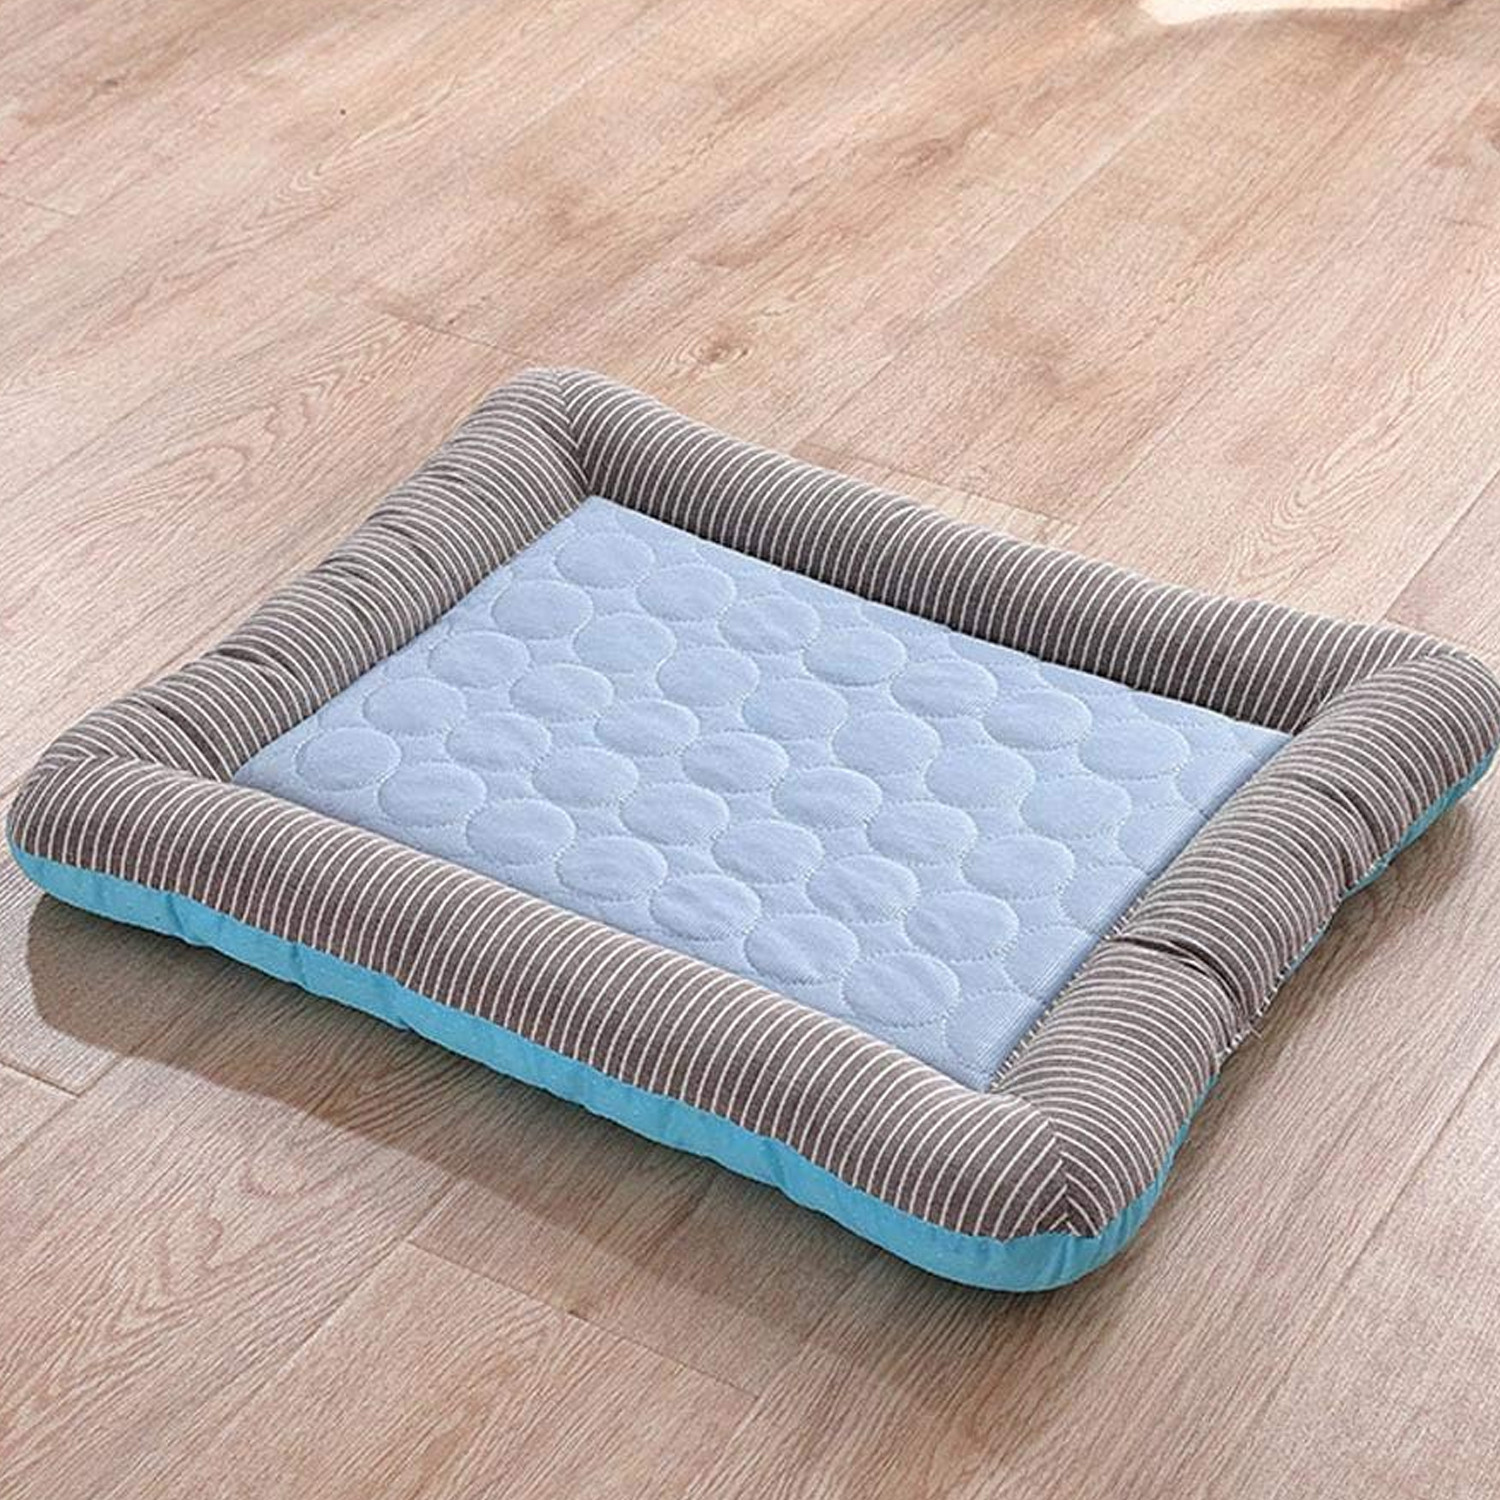 Kuber Industries Rectangular Dog & Cat Bed|Yarn Dyed Oxford Cloth|Nylon and Polyester with Cotton Filling|Self-Cooling Bed for Dog & Cat|Small Light-Weight & Durable Dog Bed|ZQCJ005B-L|Blue